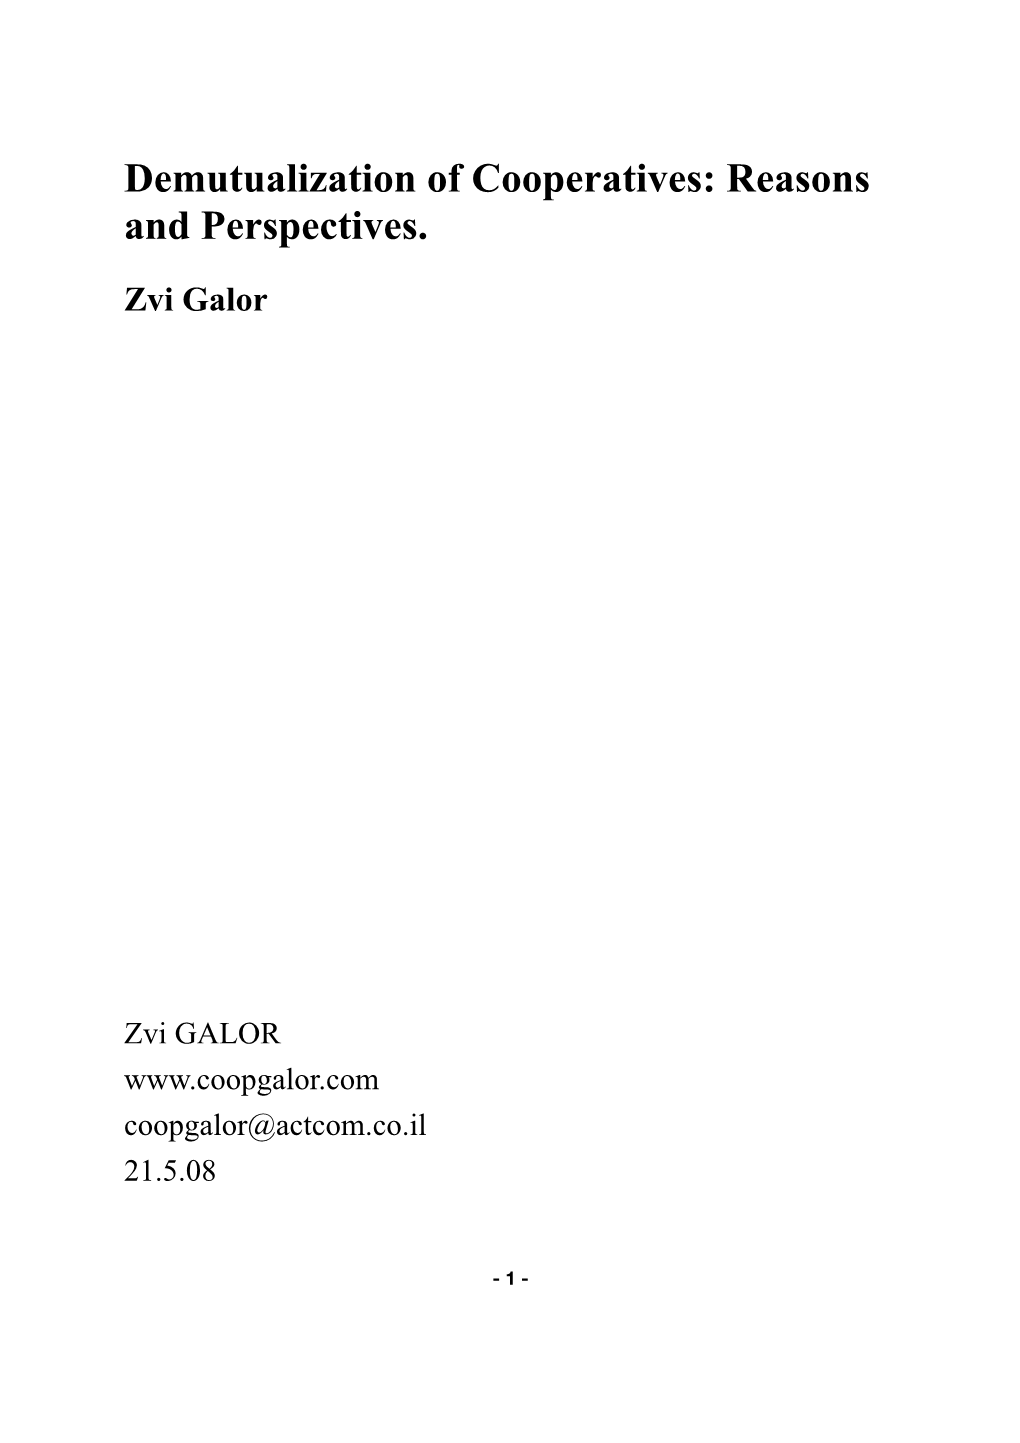 Demutualization of Cooperatives: Reasons and Perspectives